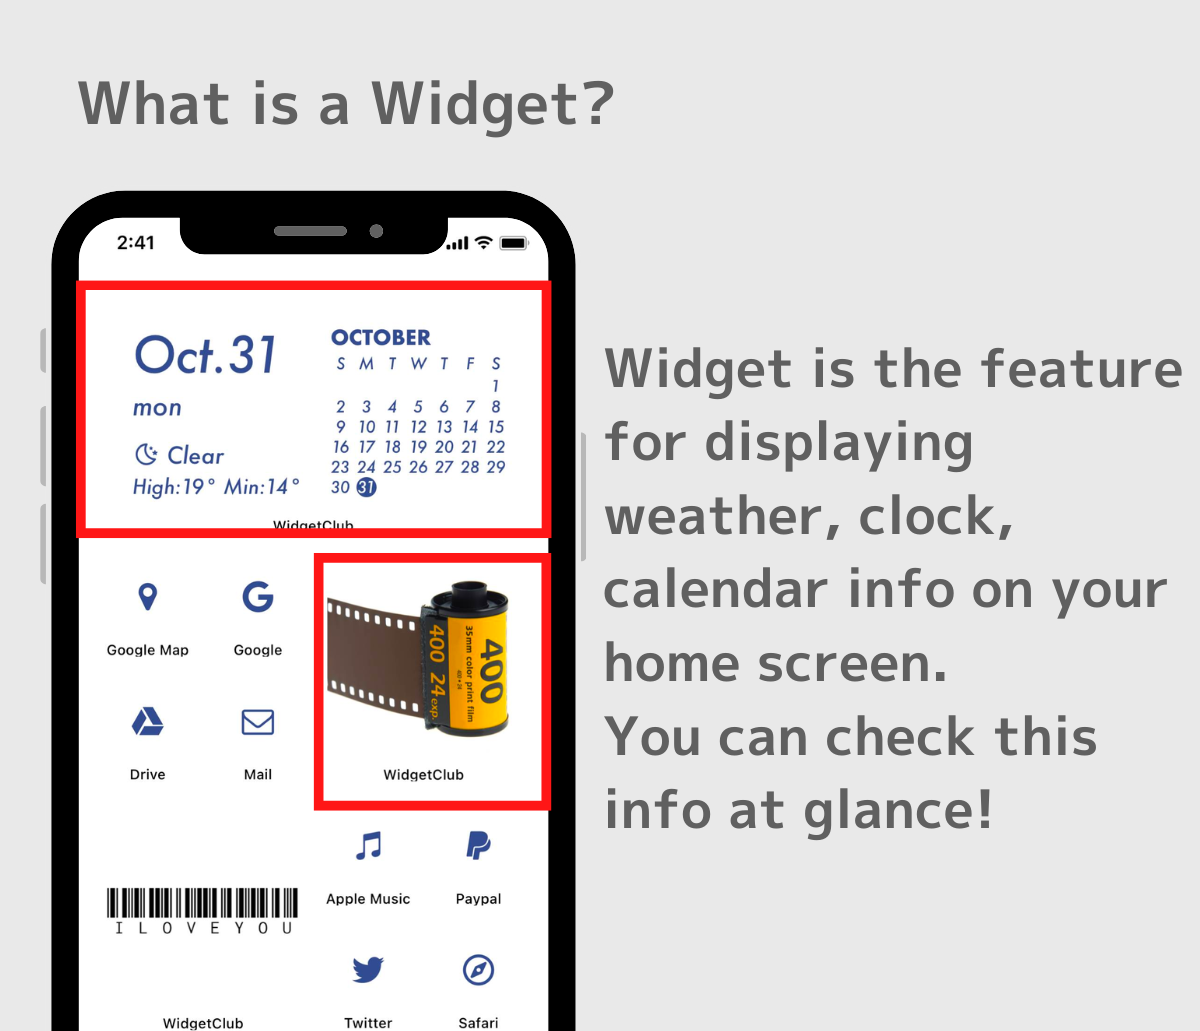 #1 image of How to add a Widget to iPhone home screen